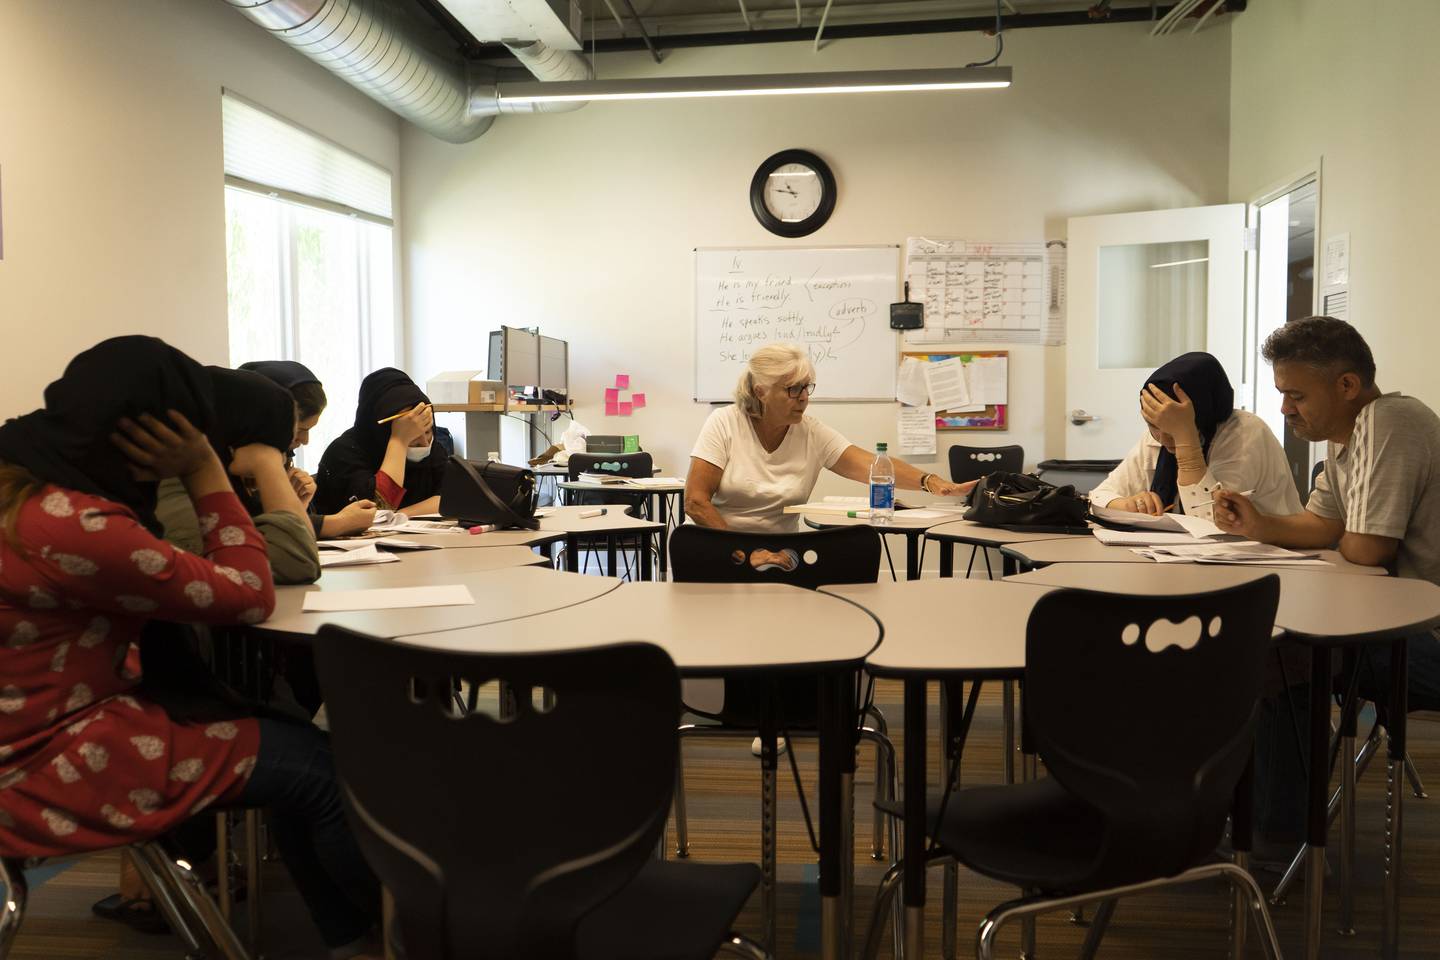 Judy Frye Jones, a volunteer English teacher at the St. Francis Neighborhood Center, has her Afghan students read aloud from lesson packets. The students work together to understand confusing words and deciding if the sentences are correct.